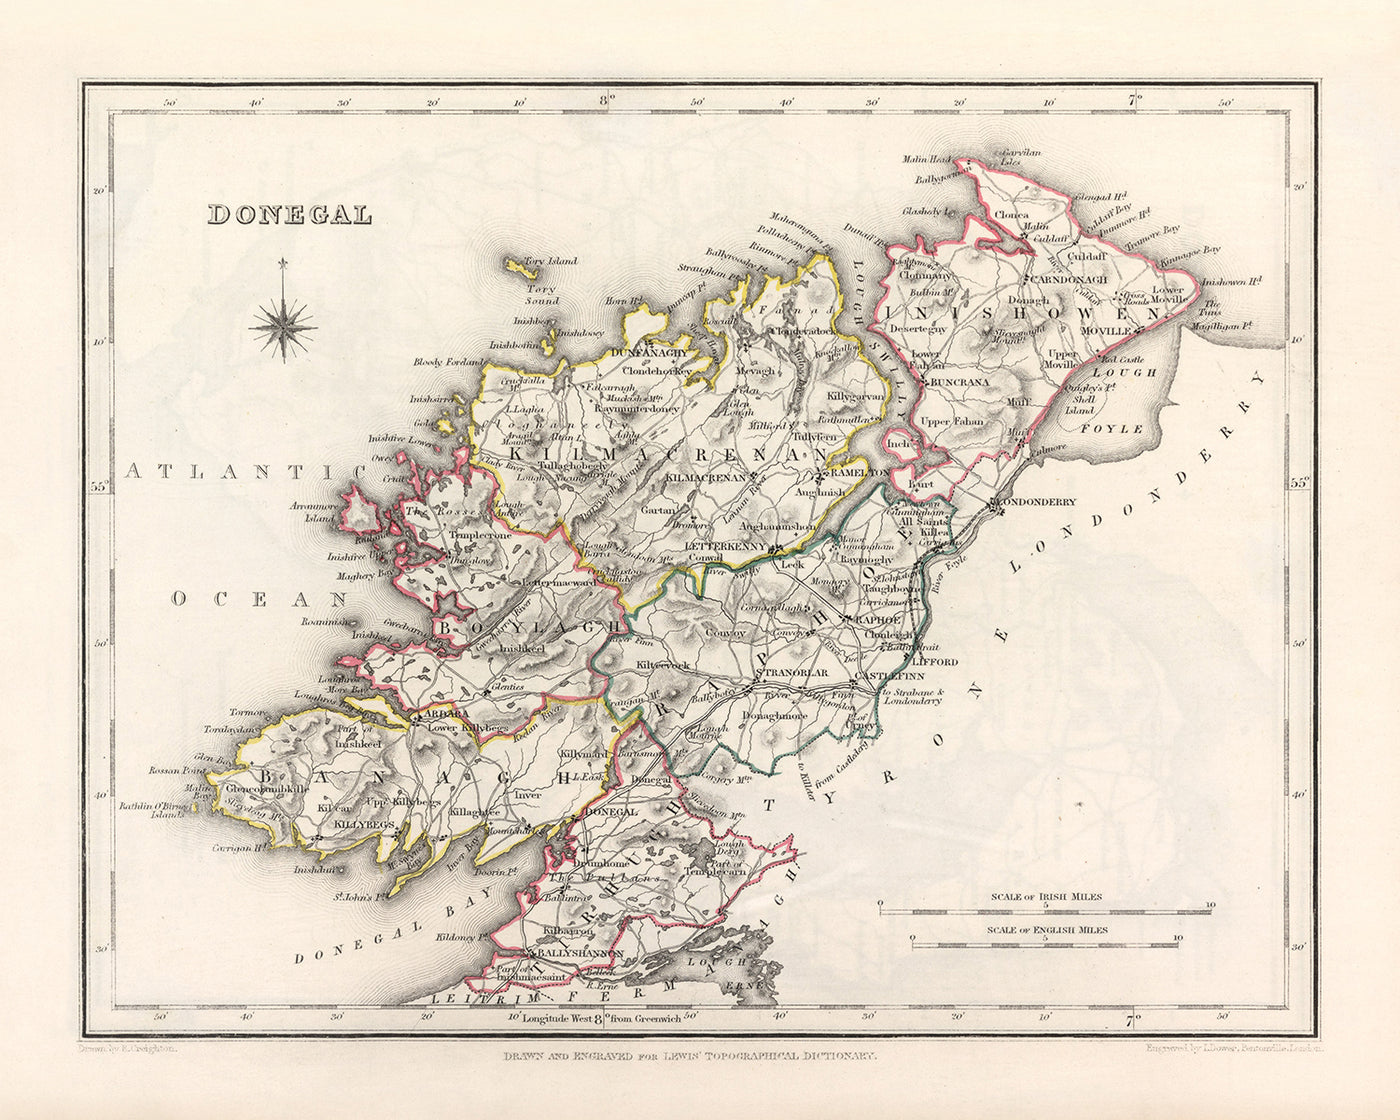 Old Map of County Donegal by Samuel Lewis, 1844: Ballyshannon, Letterkenny, Dunfanaghy, Killybegs, Glenveagh National Park